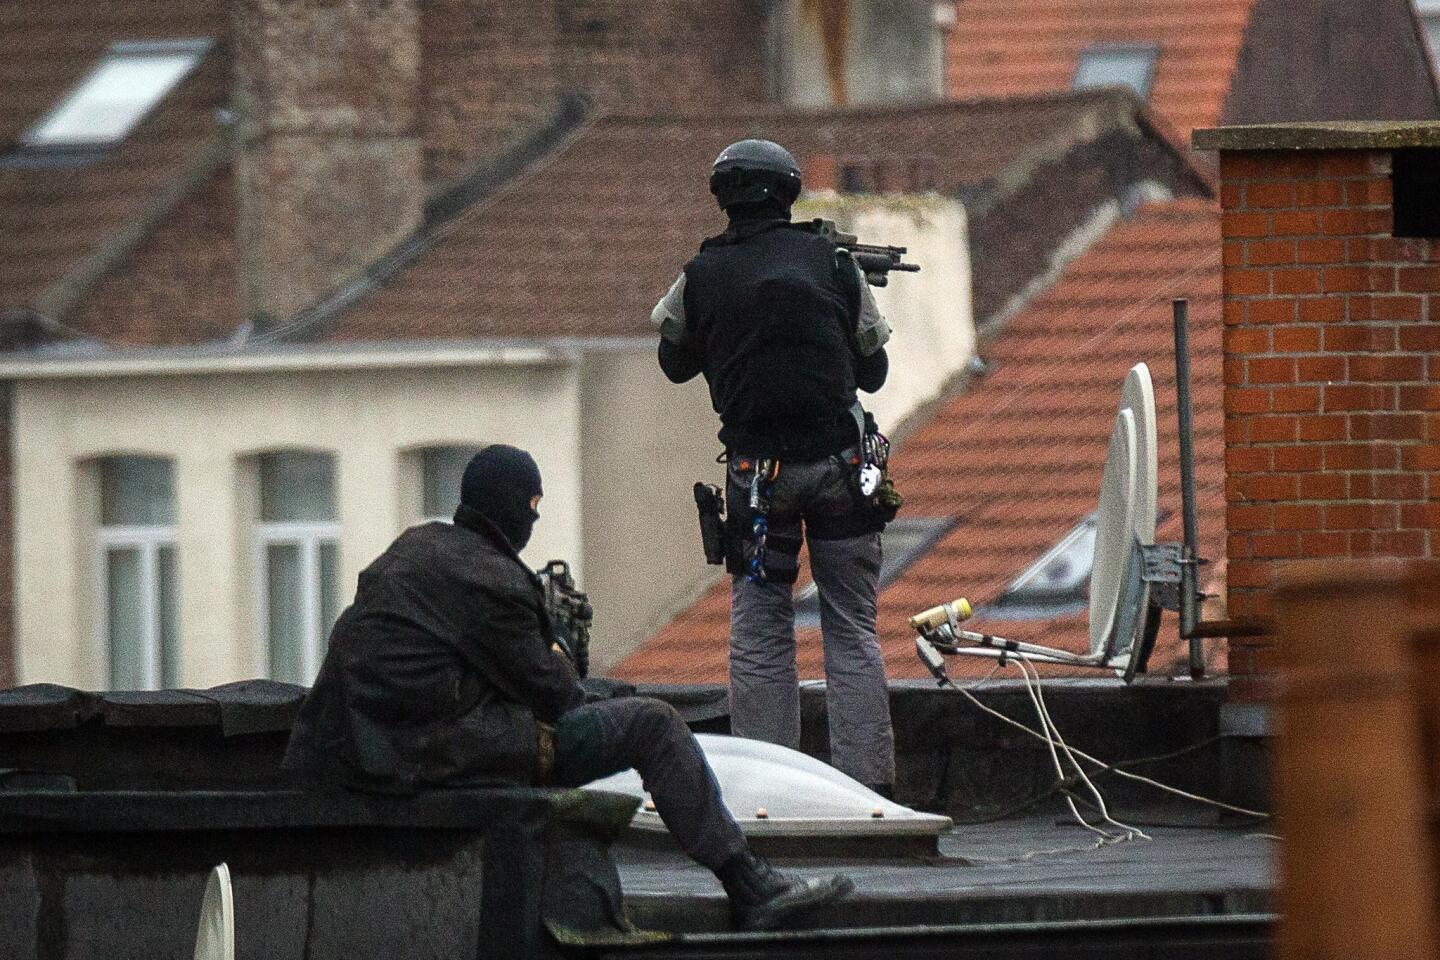 Operation in Brussels